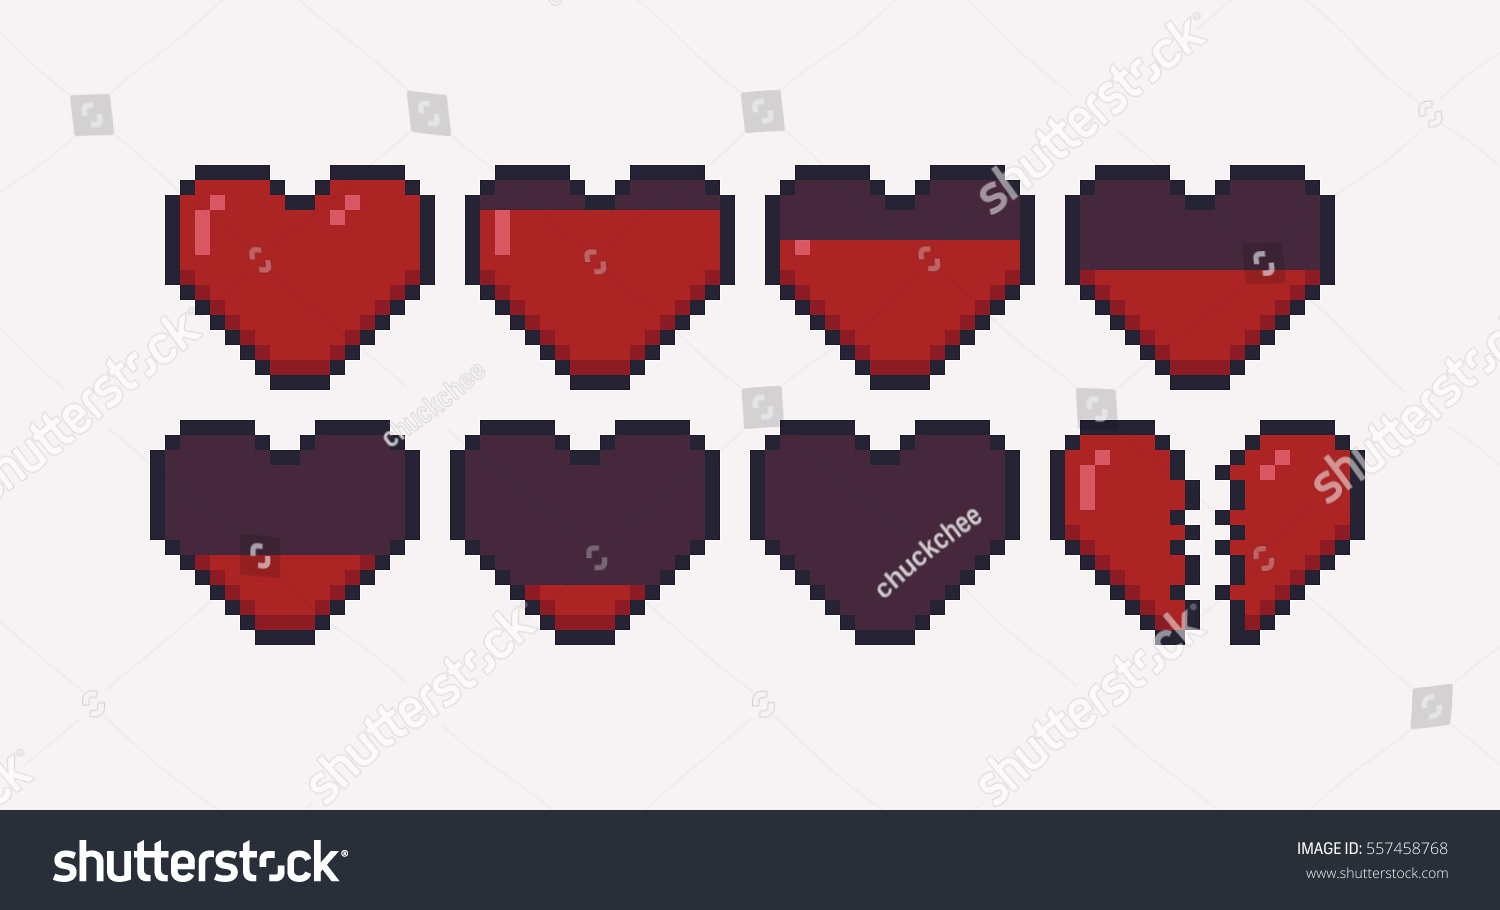 Pixel Art Hearts Different Game Health Stock Vector Royalty Free